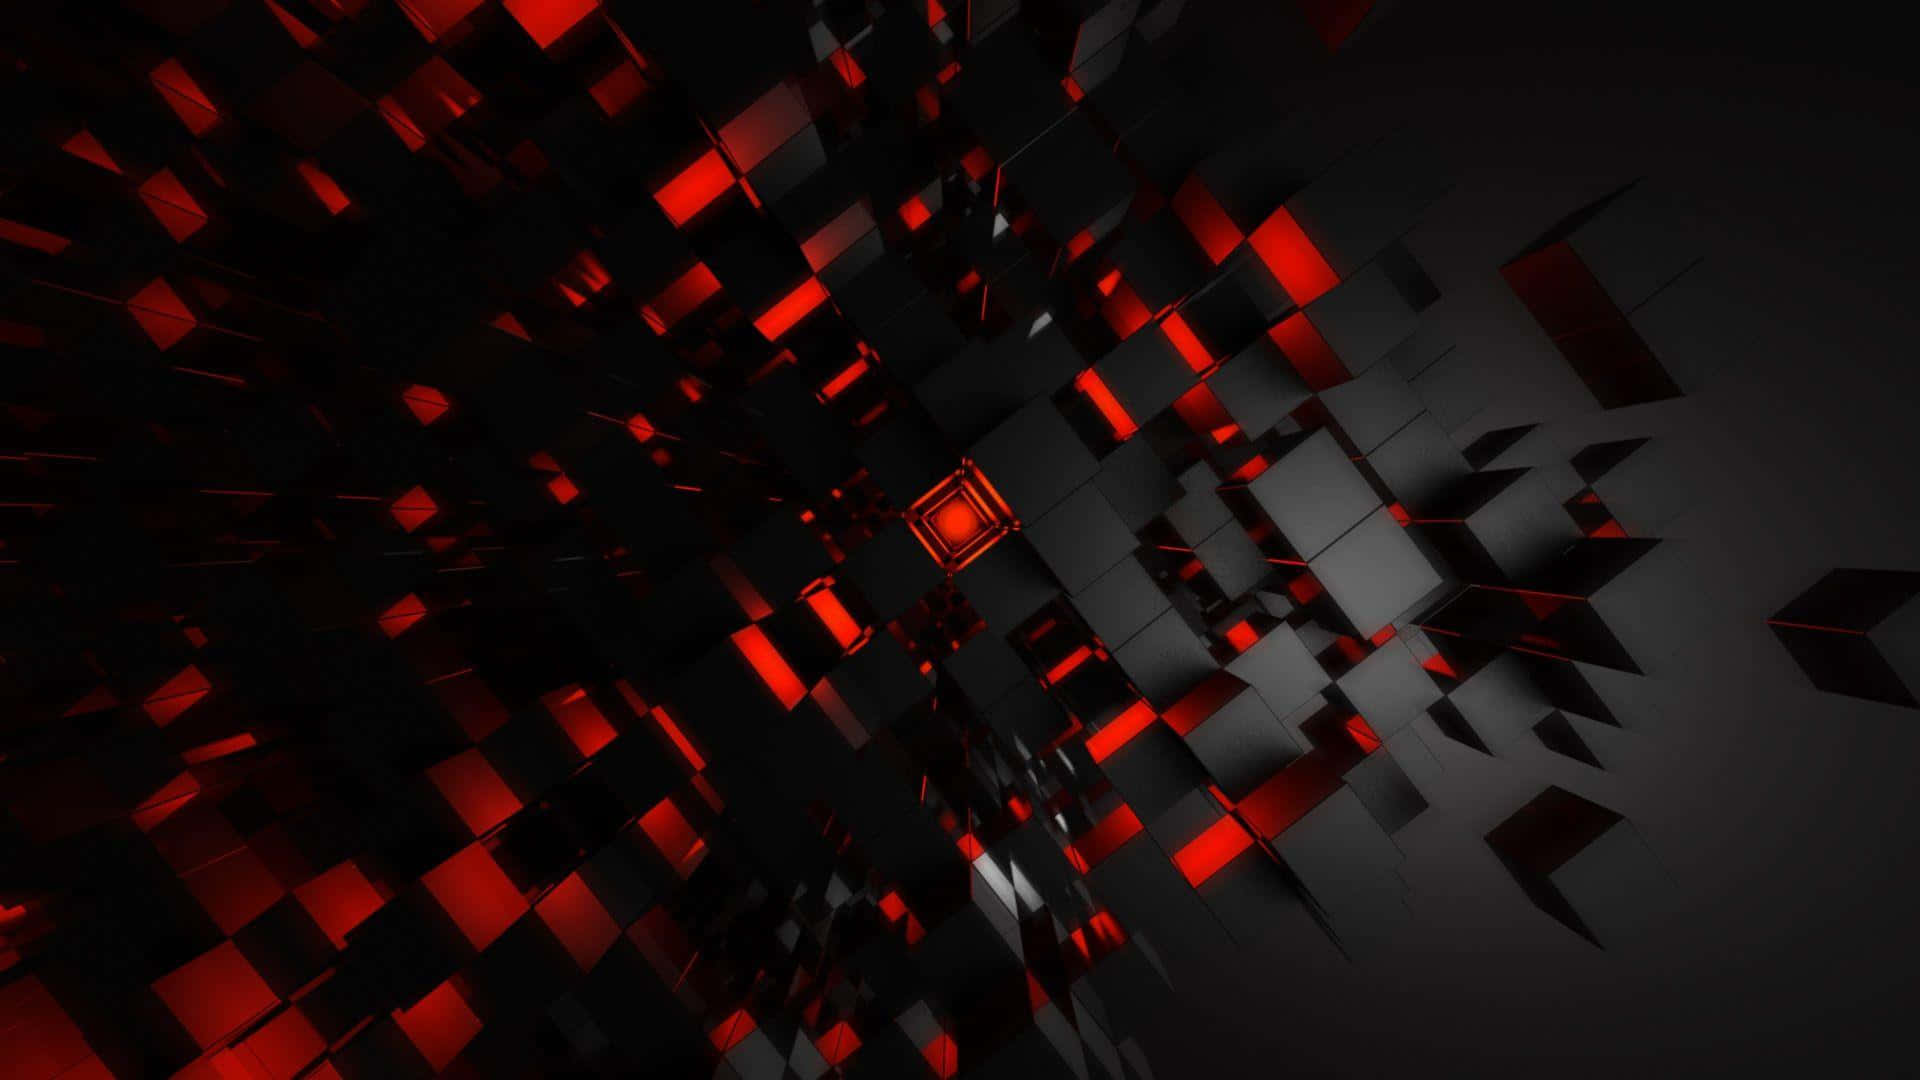 Red And Black Abstract Background With Squares Wallpaper